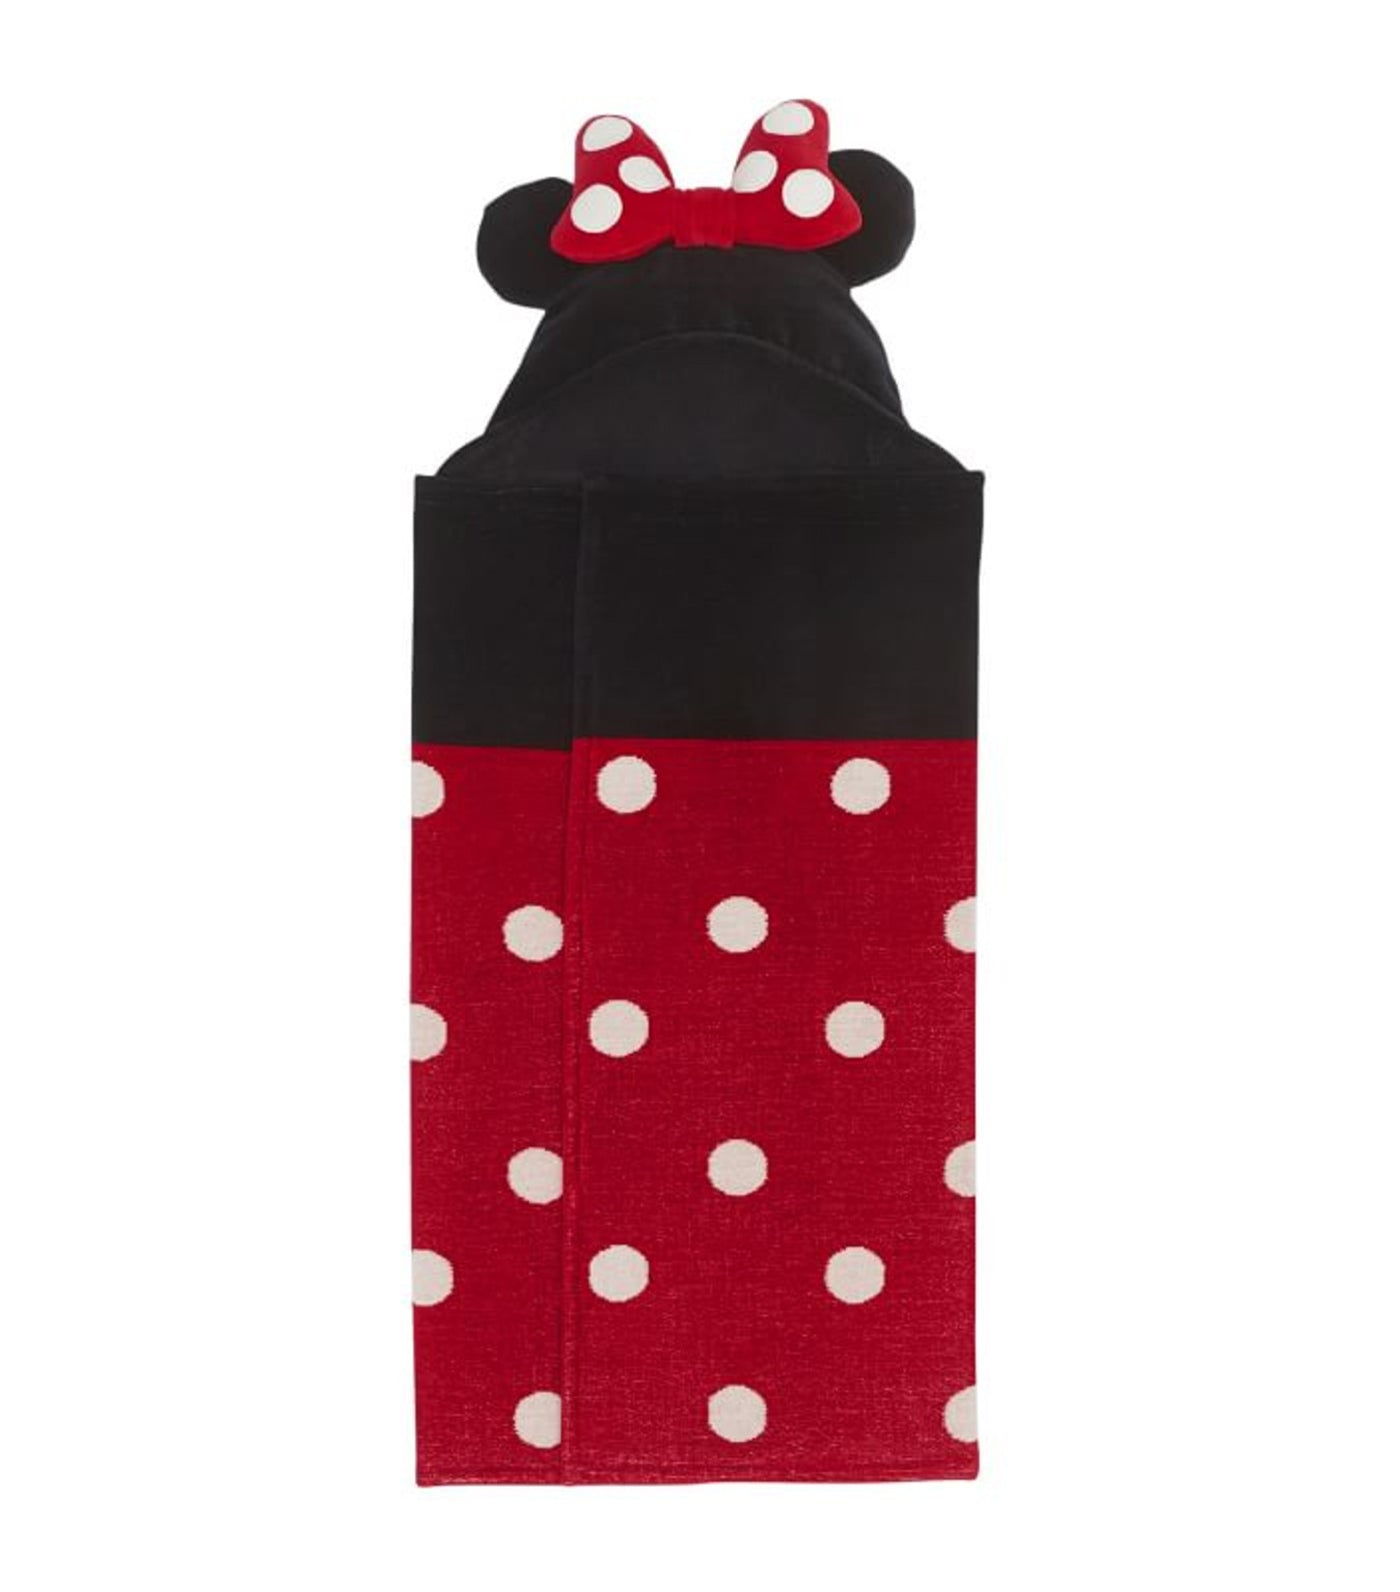 Disney Minnie Mouse Baby Hooded Towel - Black and Red